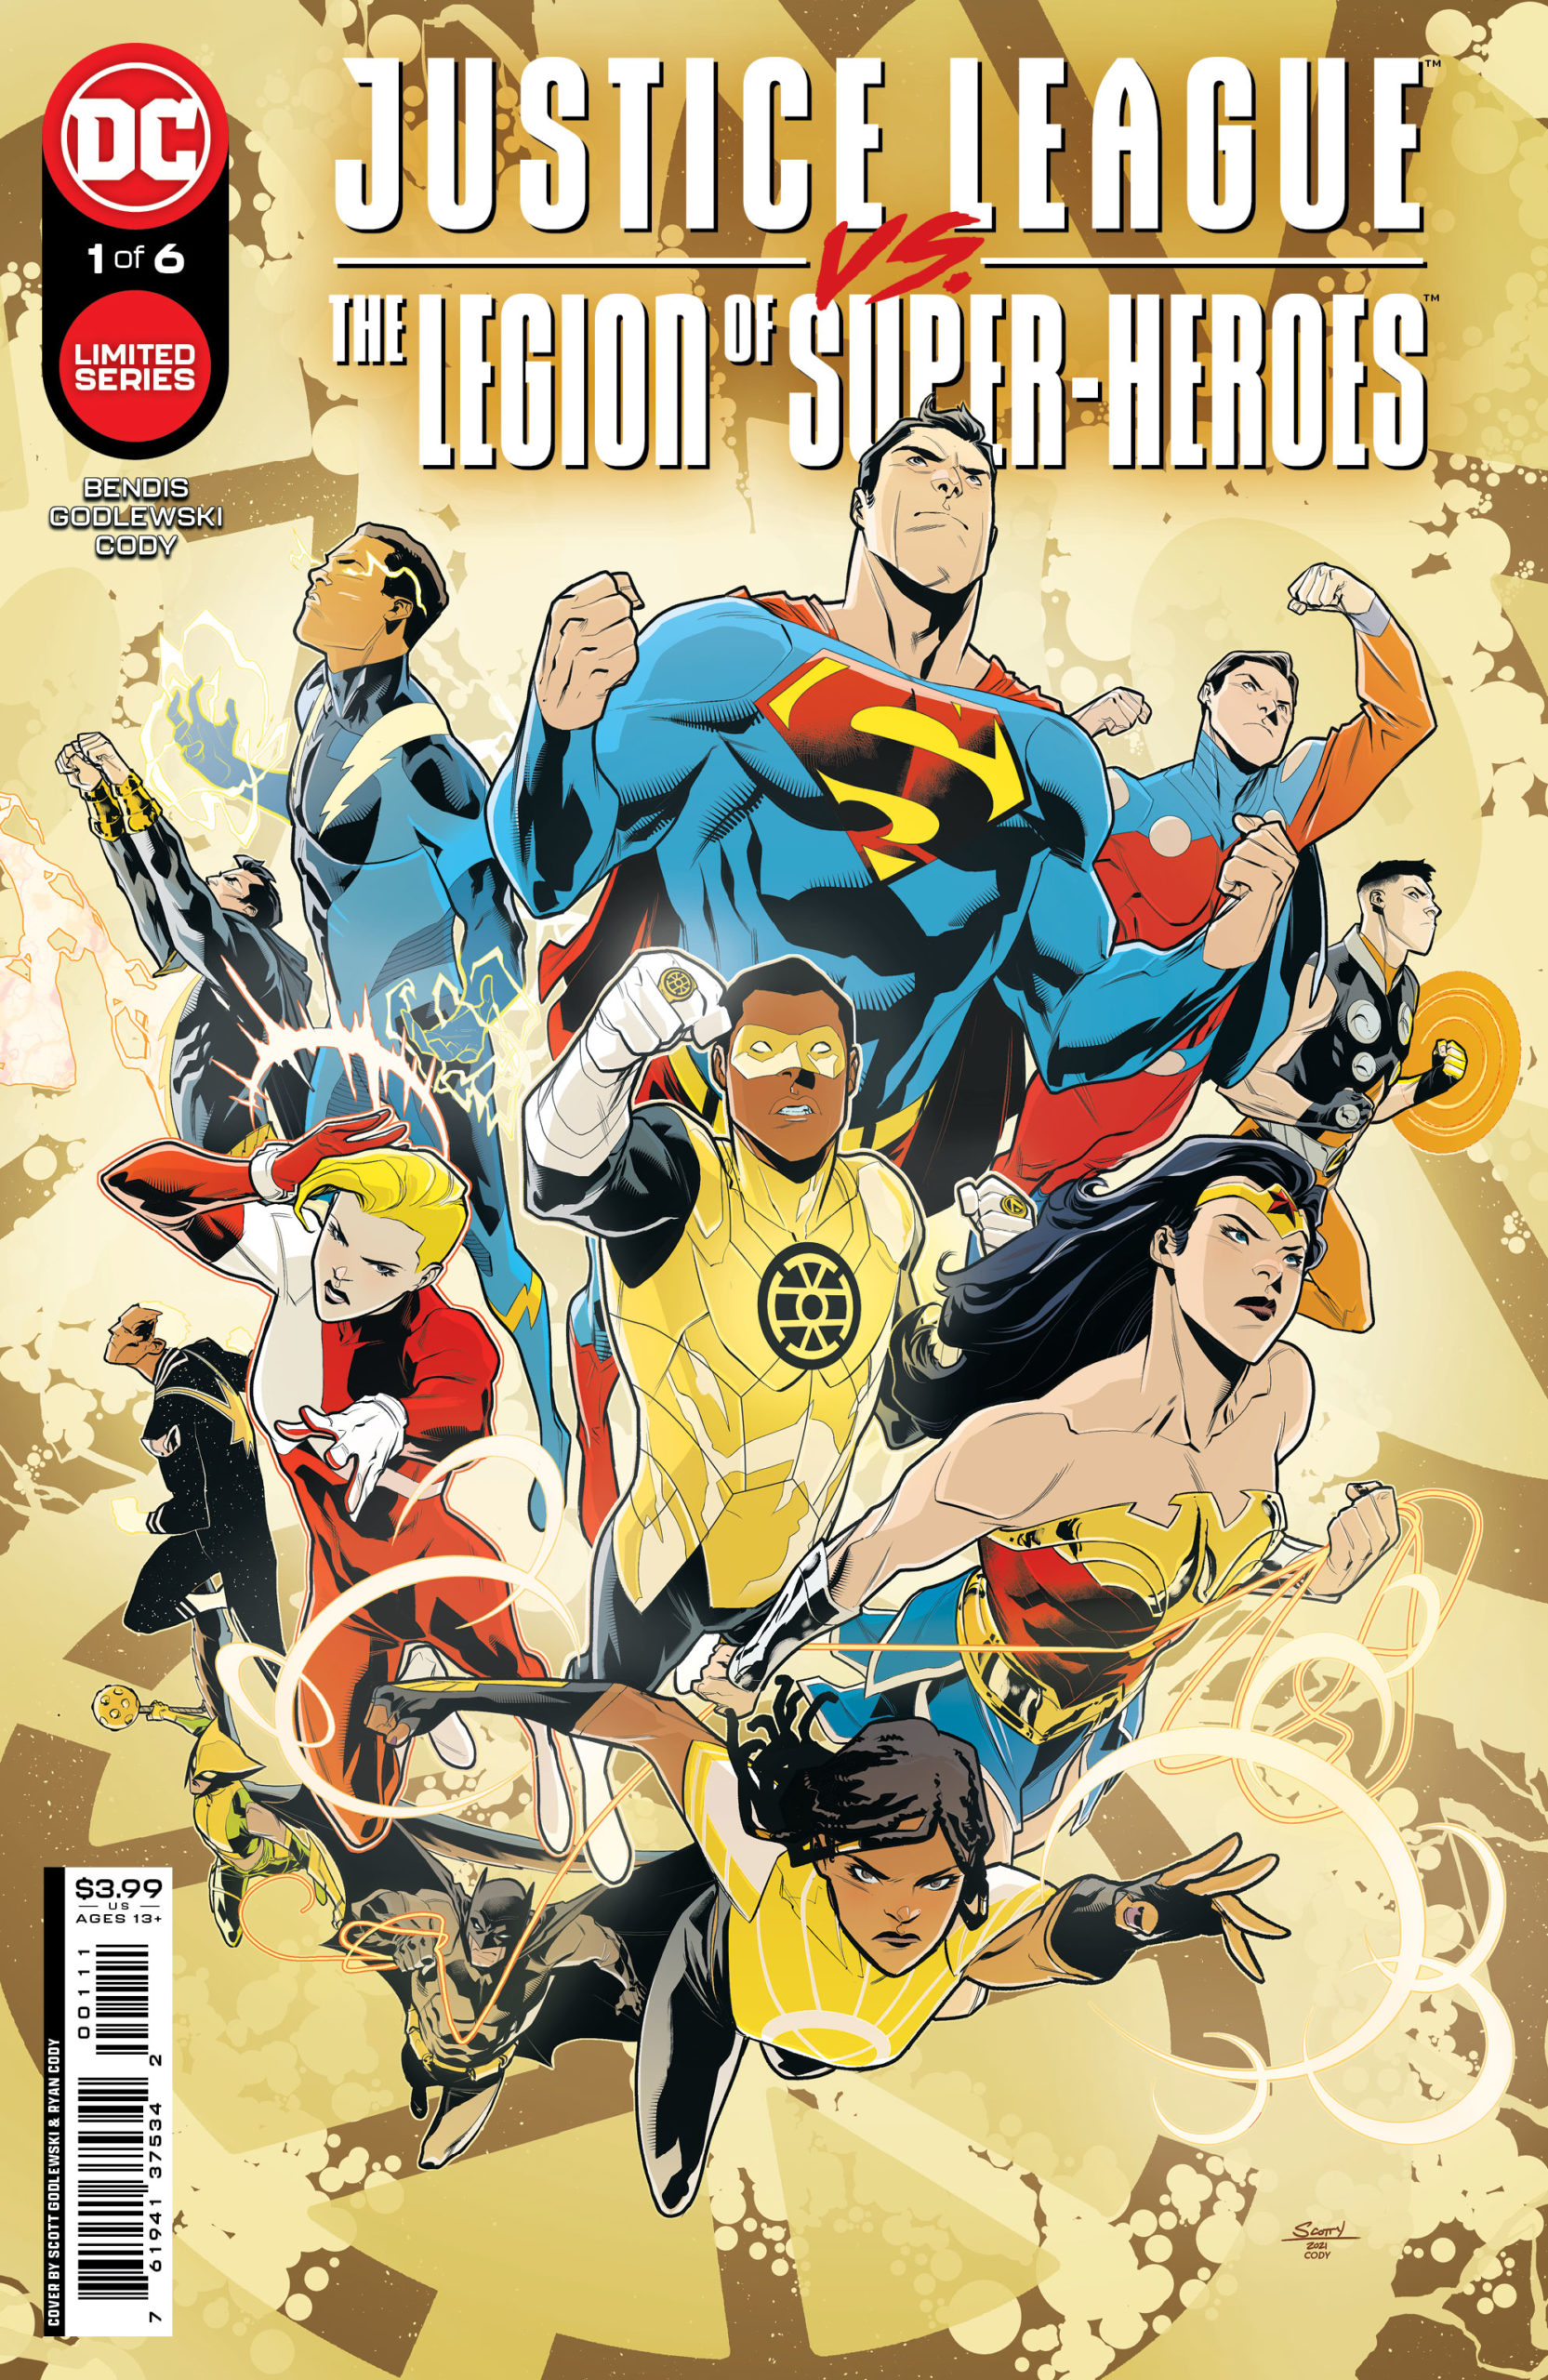 Justice League Vs. The Legion of Super-Heroes #1 - Main Cover